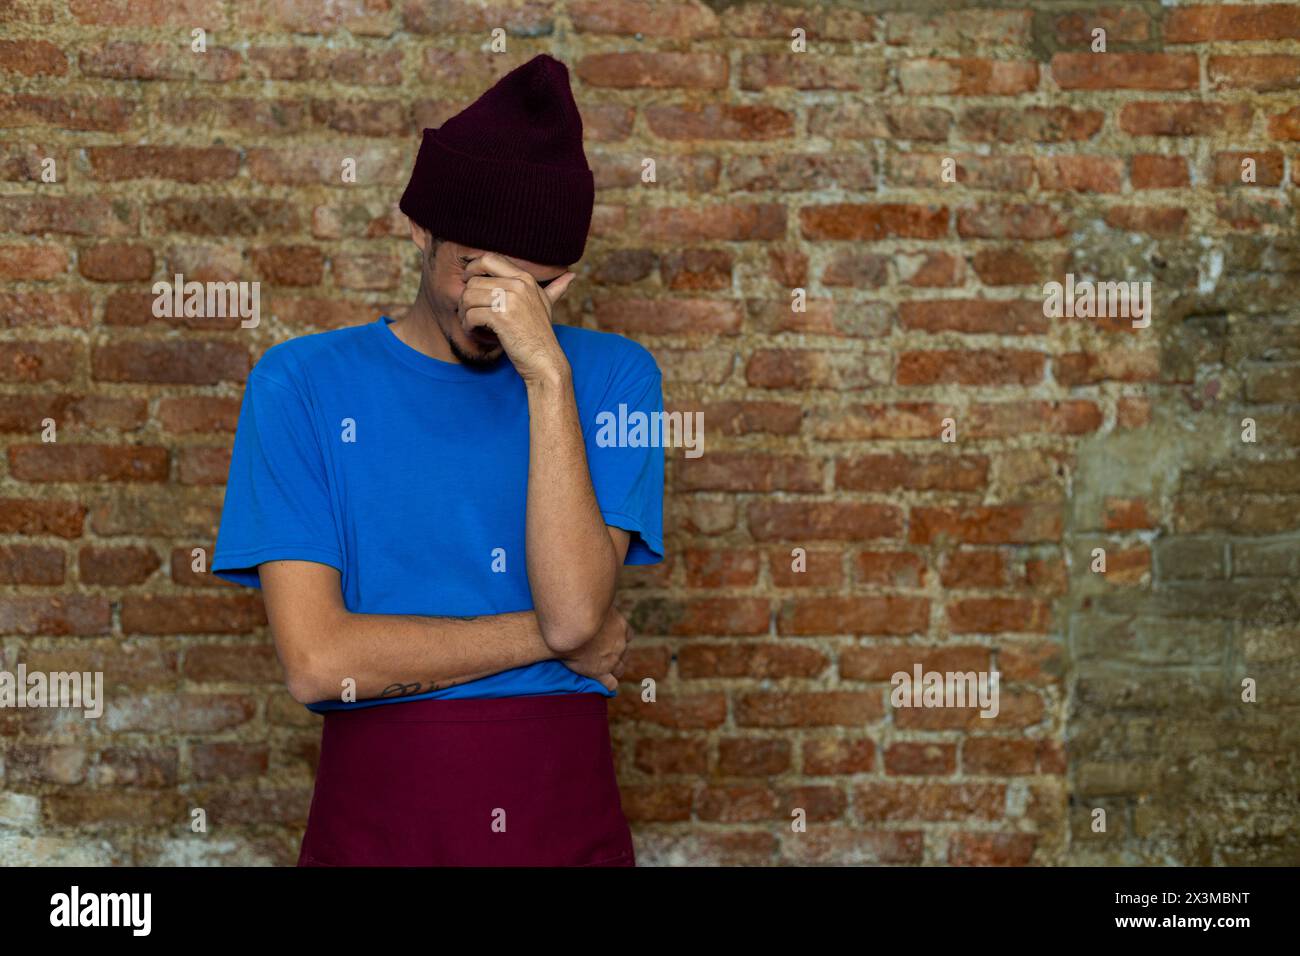 l Young Latino man (28) covers his face out of embarrassment. Copy space, brick background. Stock Photo